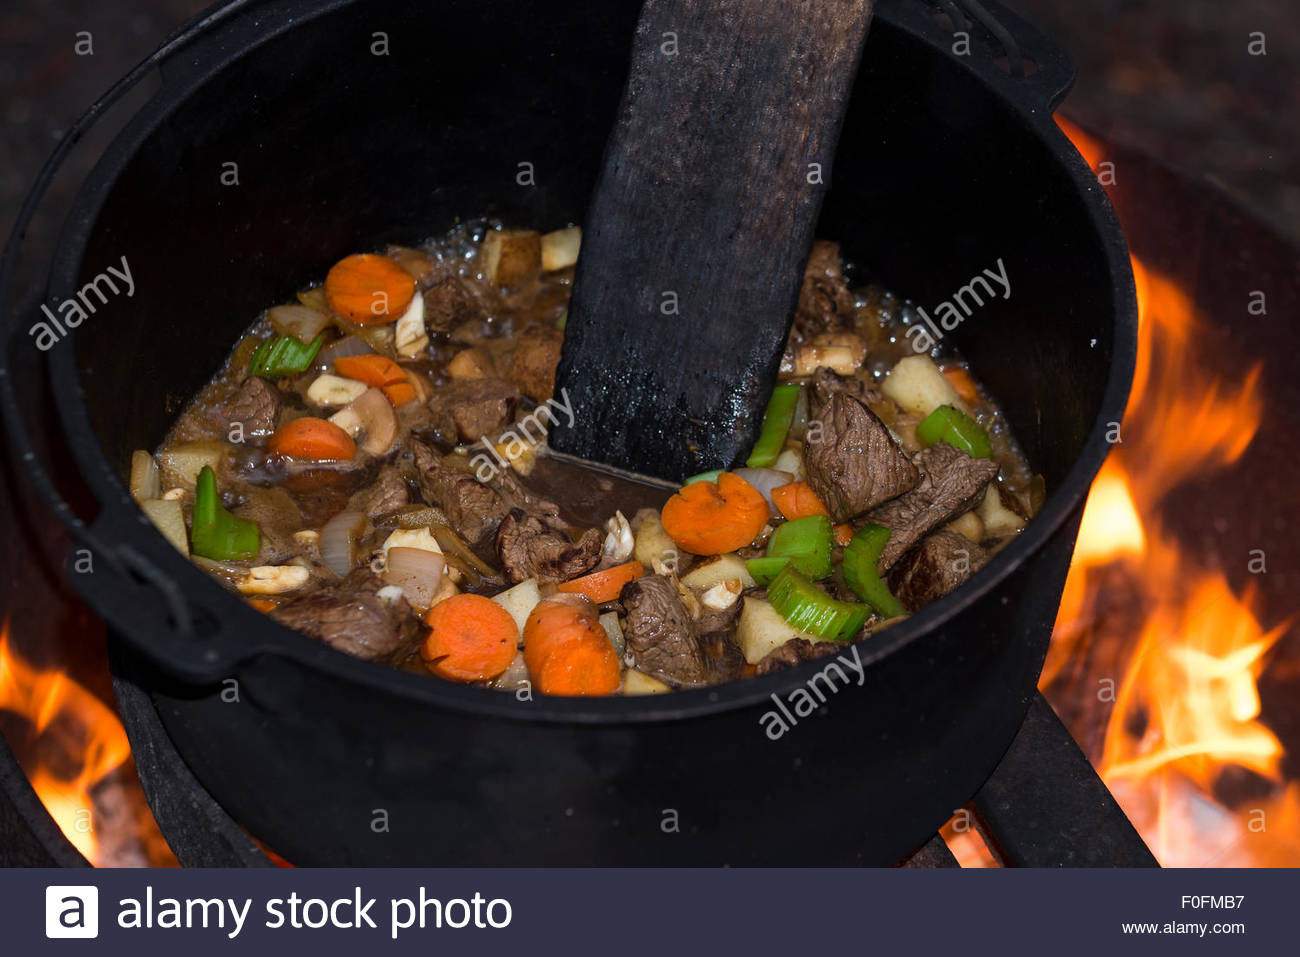 Beef Stew In Dutch Oven
 Beef stew cooking in a cast iron dutch oven over an open